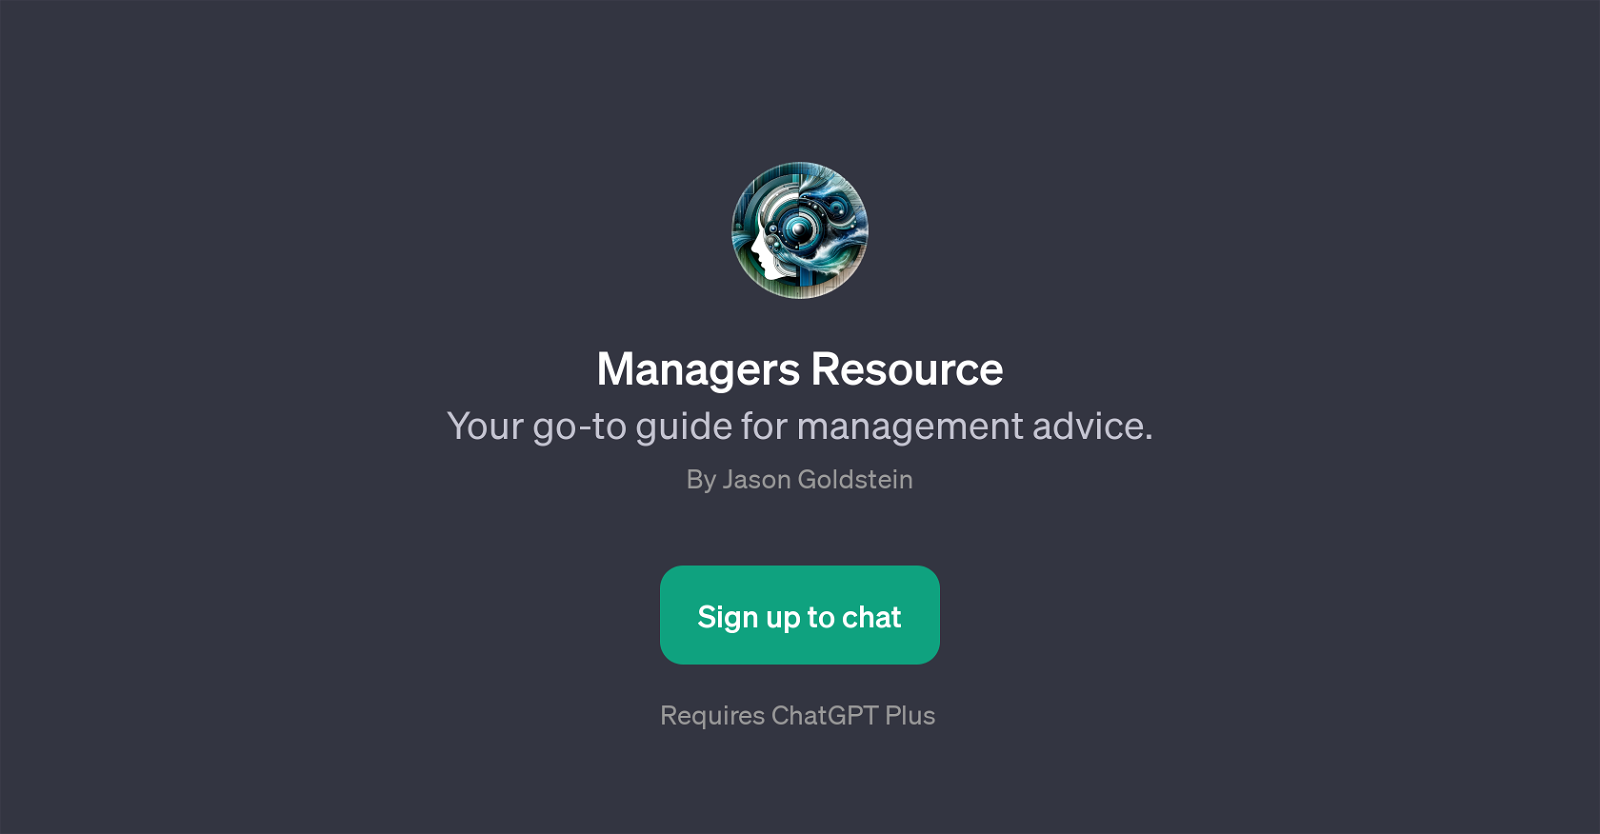 Managers Resource website